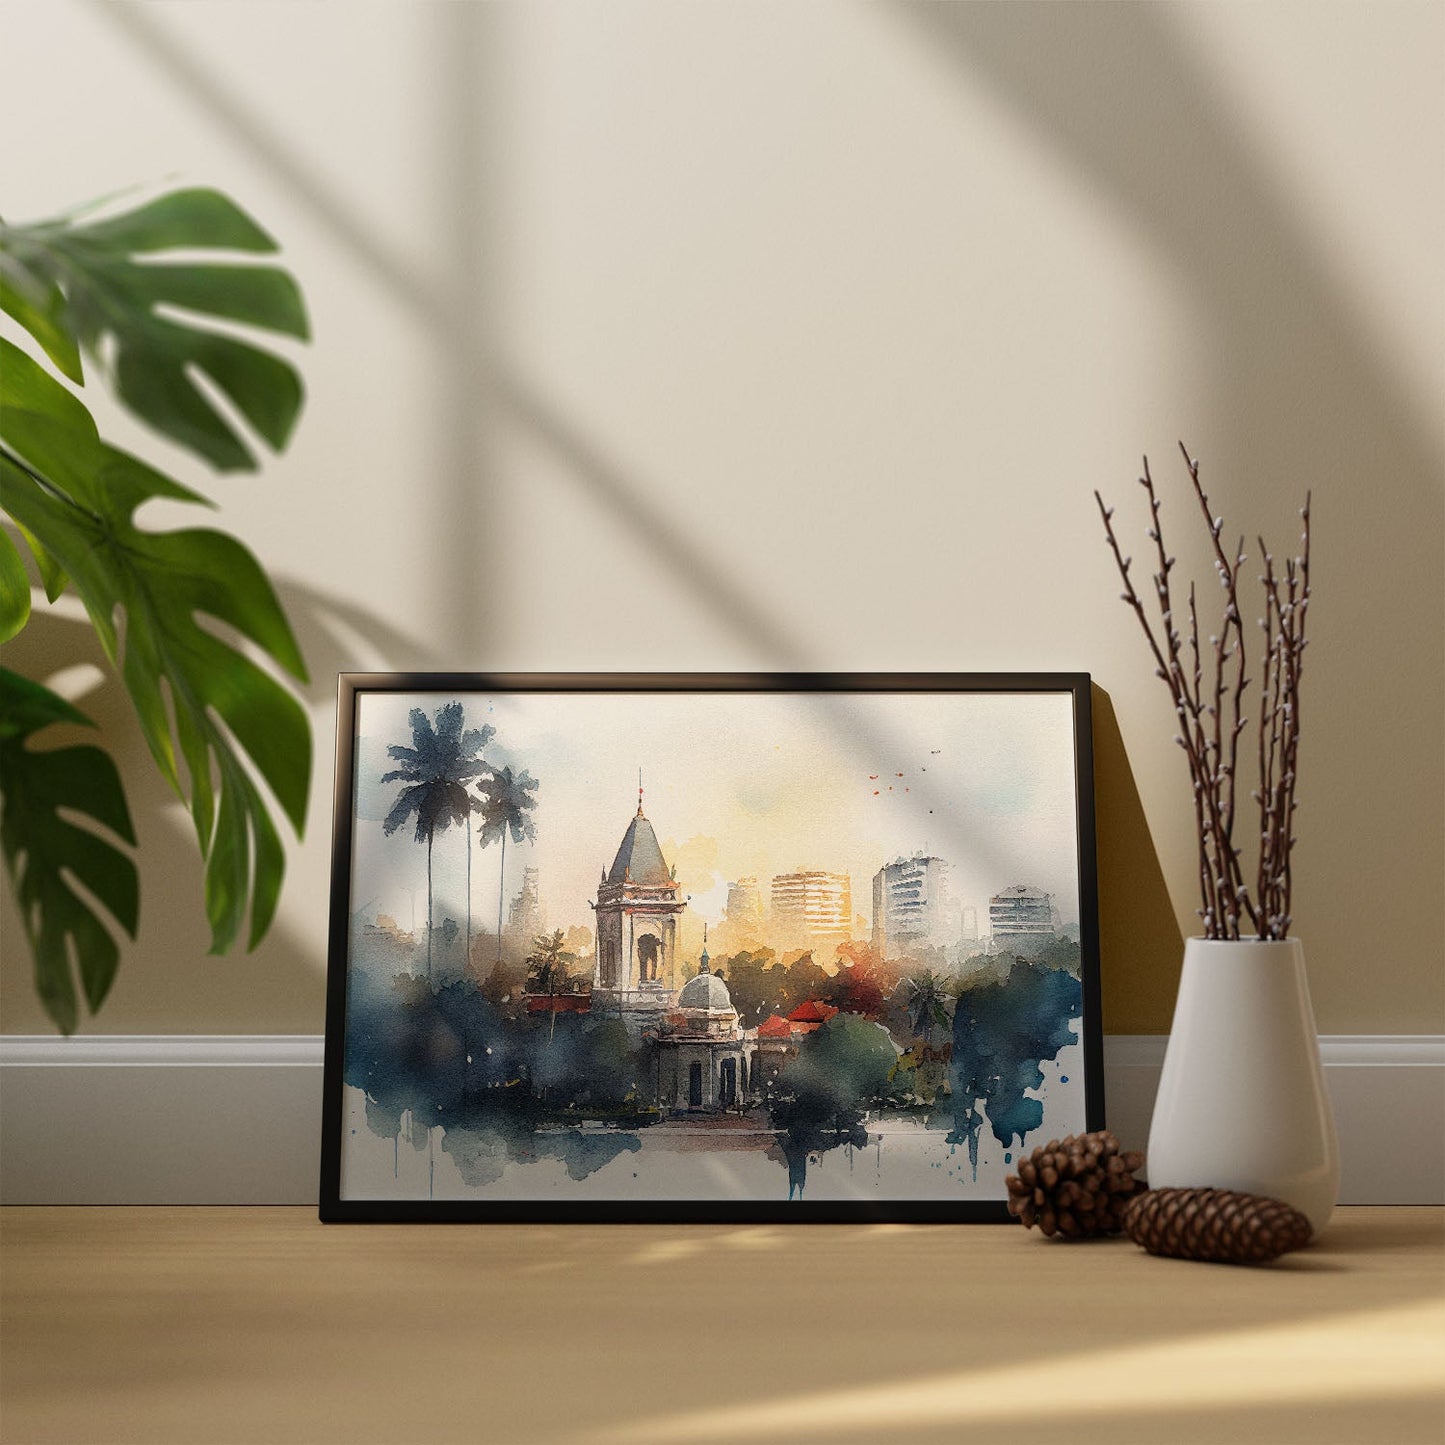 Nacnic watercolor of a skyline of the city of Hanoi_2. Aesthetic Wall Art Prints for Bedroom or Living Room Design.-Artwork-Nacnic-A4-Sin Marco-Nacnic Estudio SL